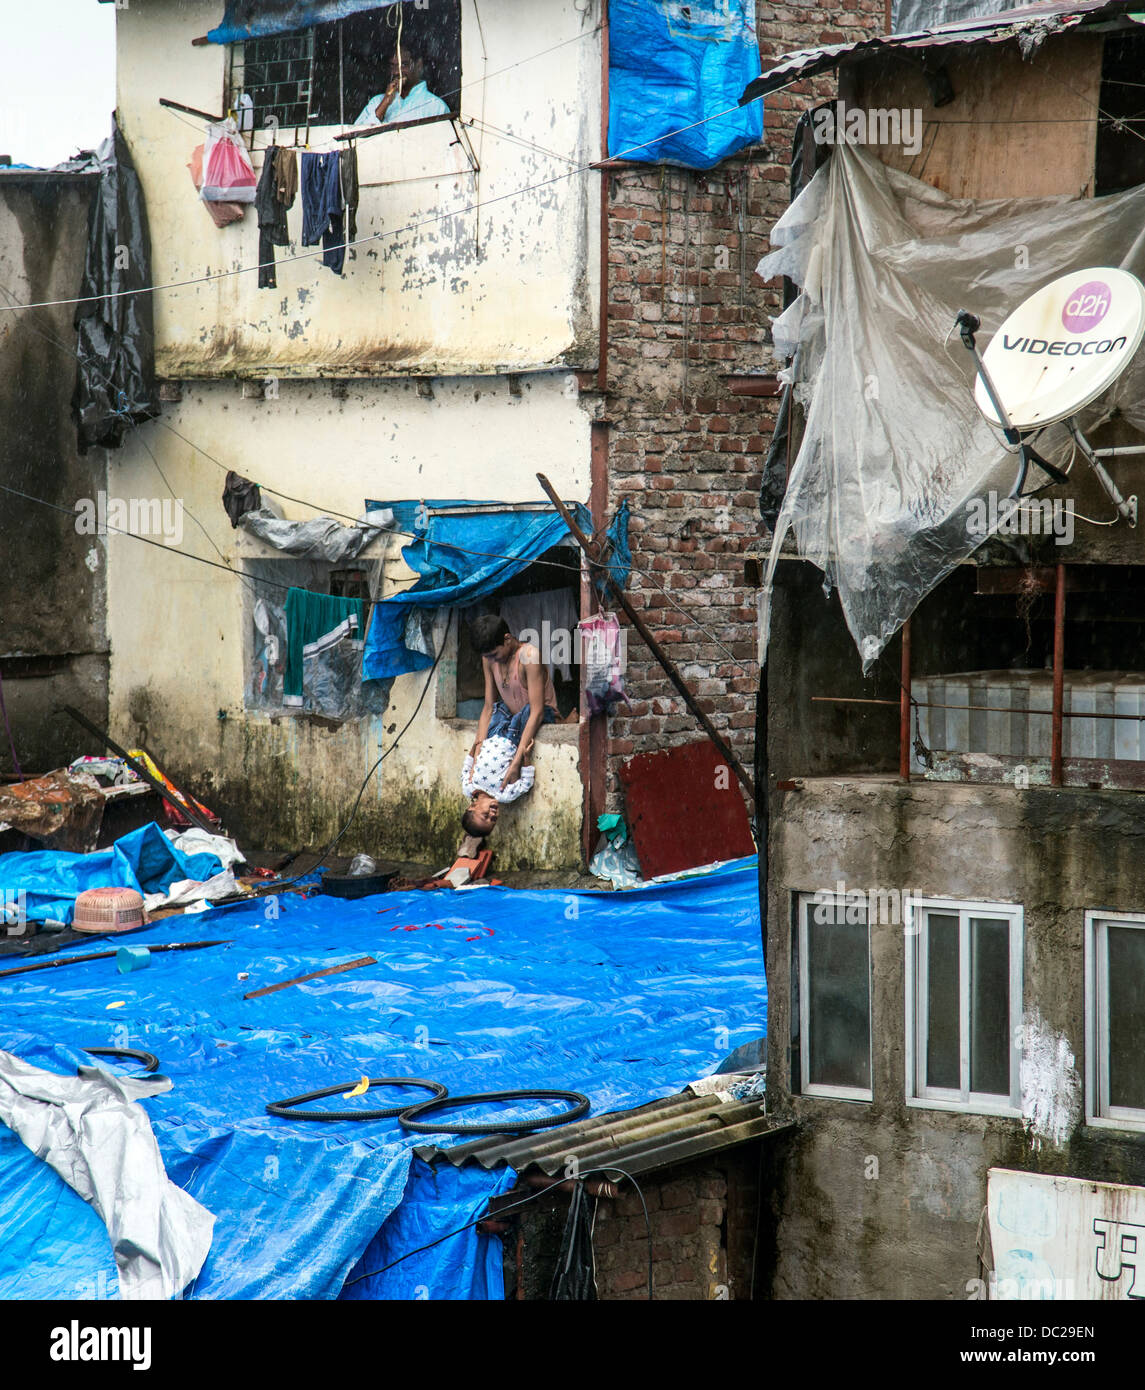 Slum buildings life children playing hanging out of window held by legs whilst father brushes teeth upstairs Stock Photo